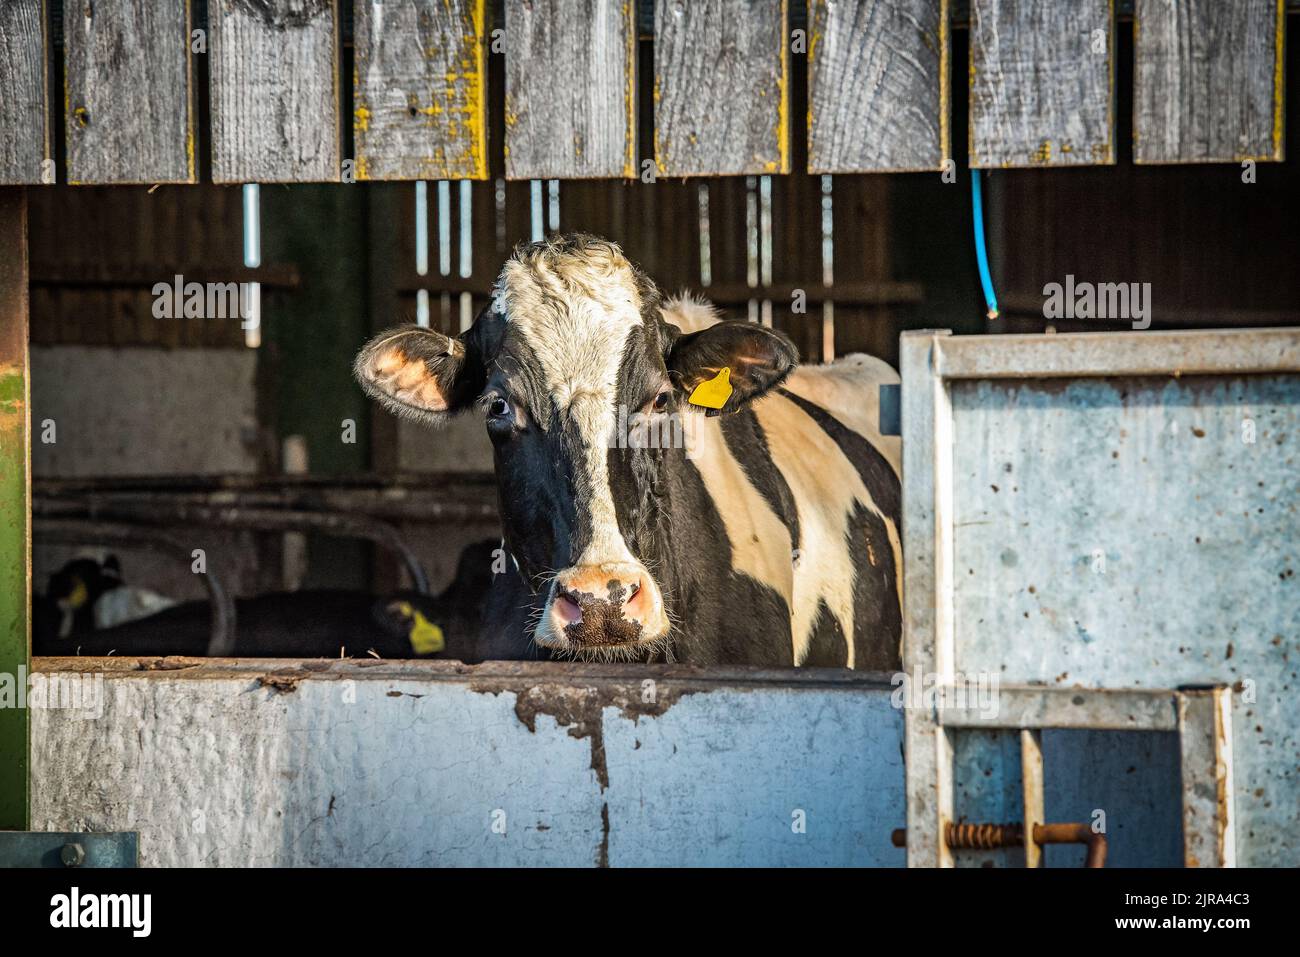 A dairy cow looking out of a farm building, Cheshire, UK Stock Photo